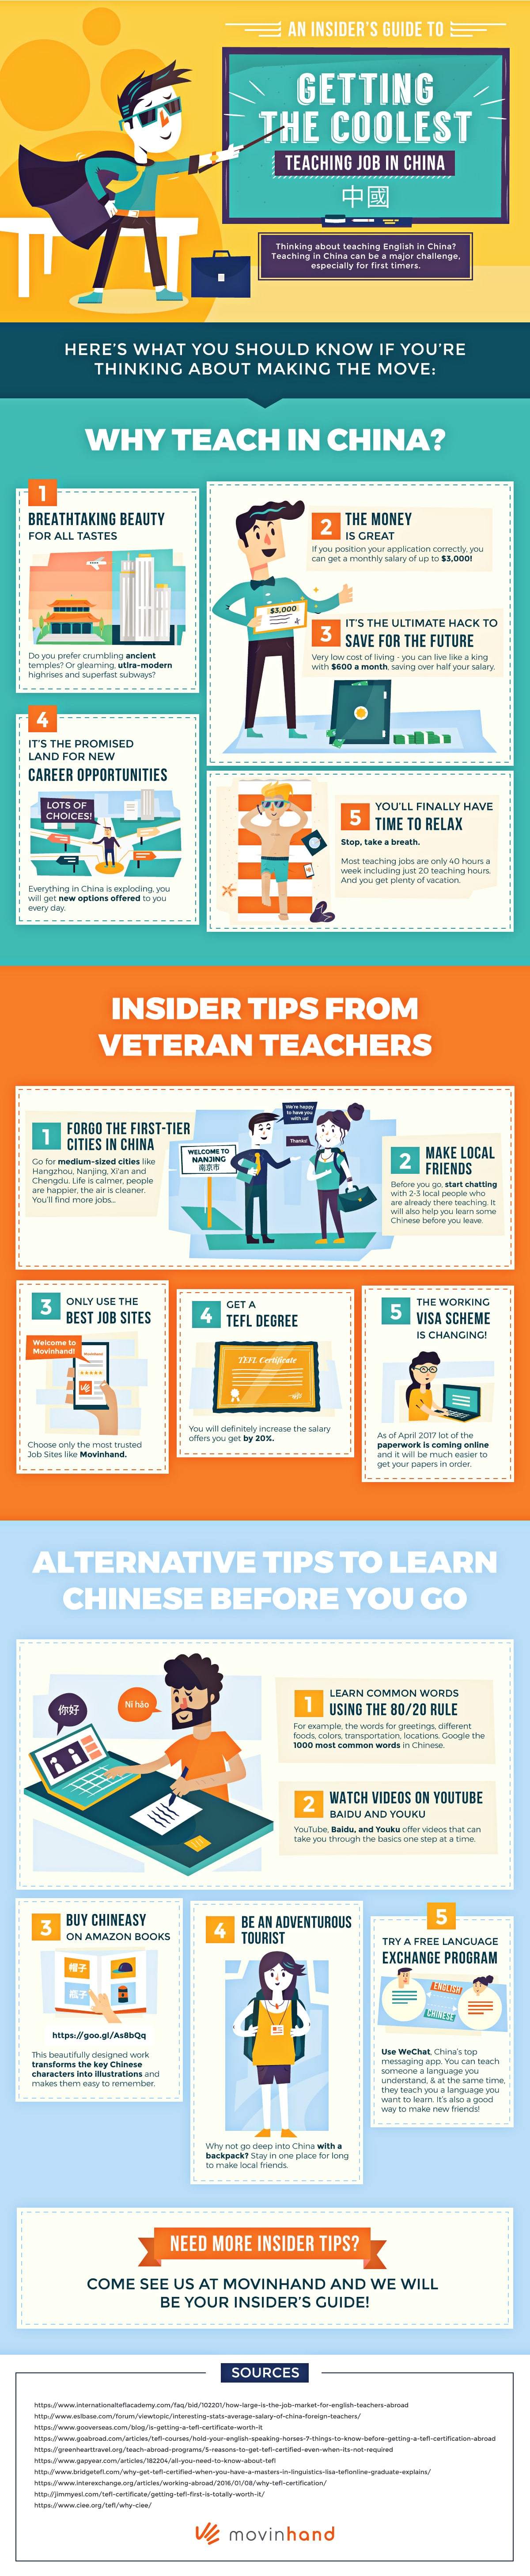 How to Get the Coolest Teaching Job in China Infographic